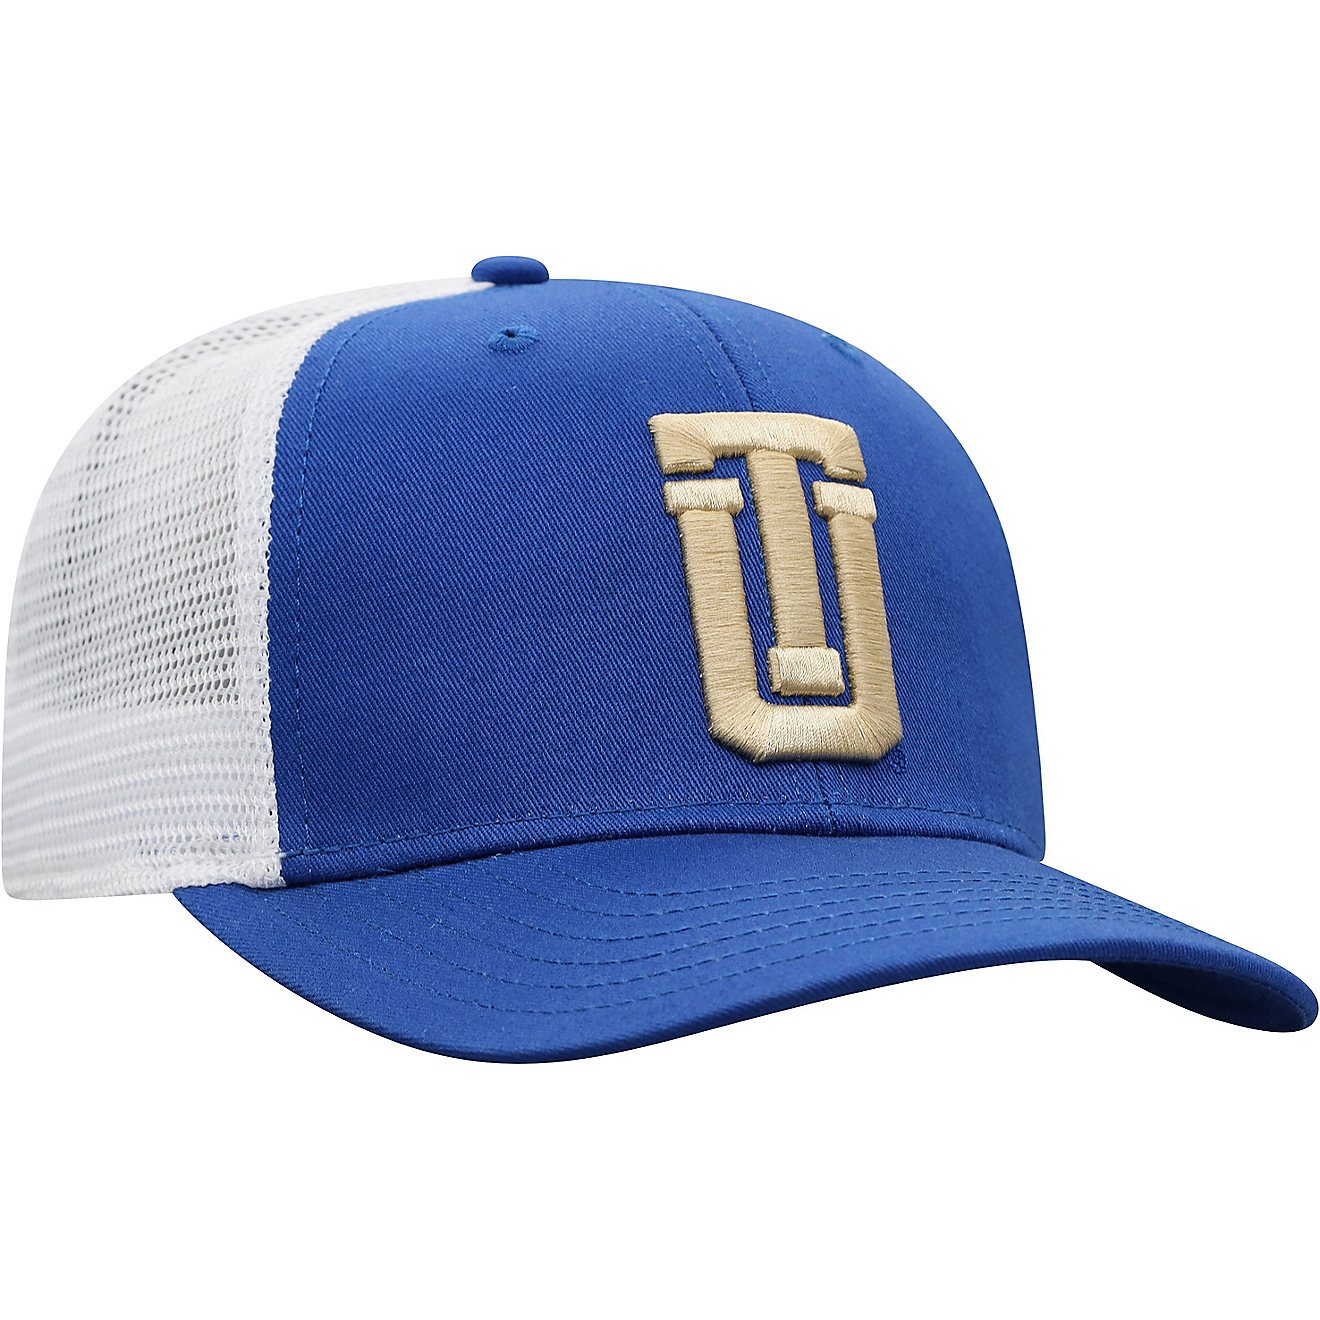 Top of The World Adults' University of Tulsa BB 2-Tone Adjustable Cap                                                            - view number 4